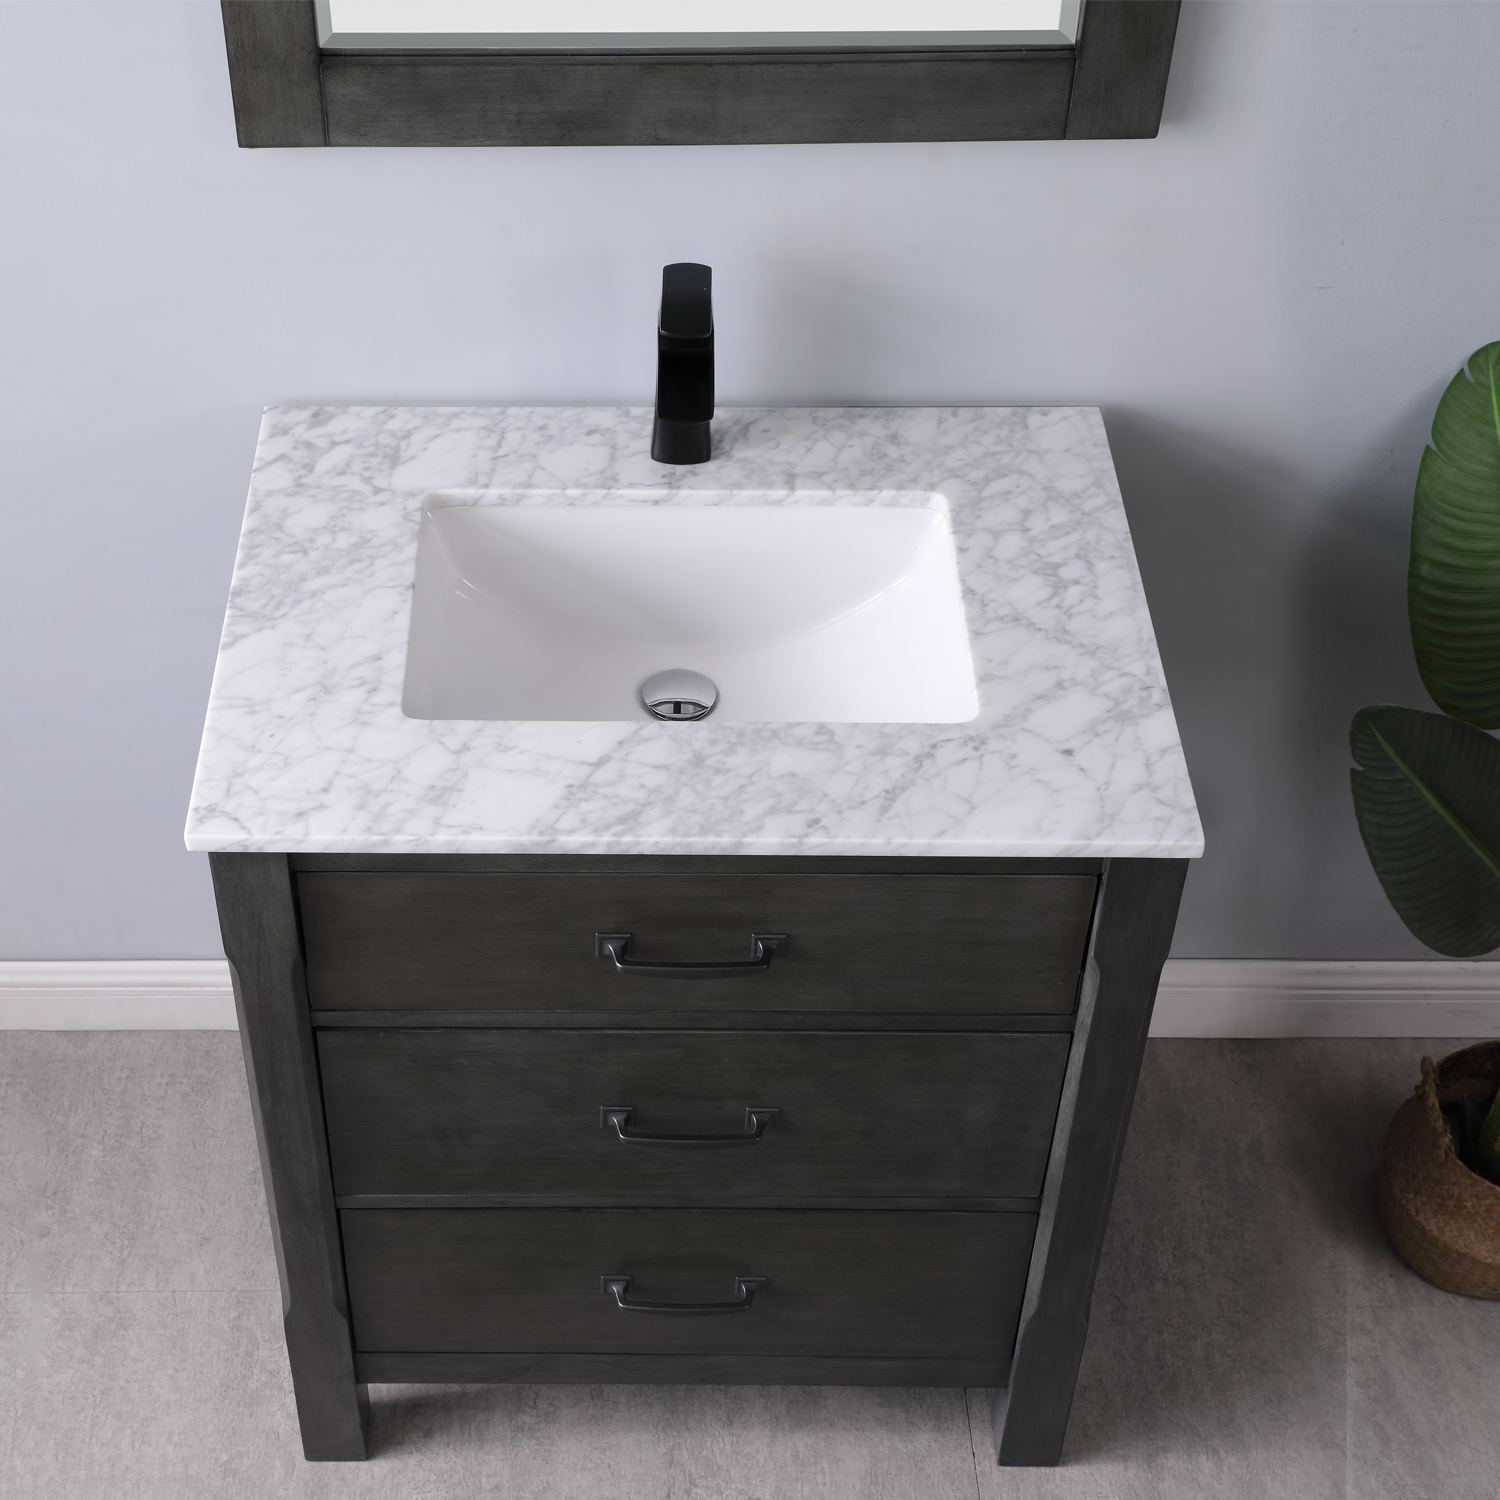 Issac Edwards Collection 30" Single Bathroom Vanity Set in Rust Black and Carrara White Marble Countertop without Mirror